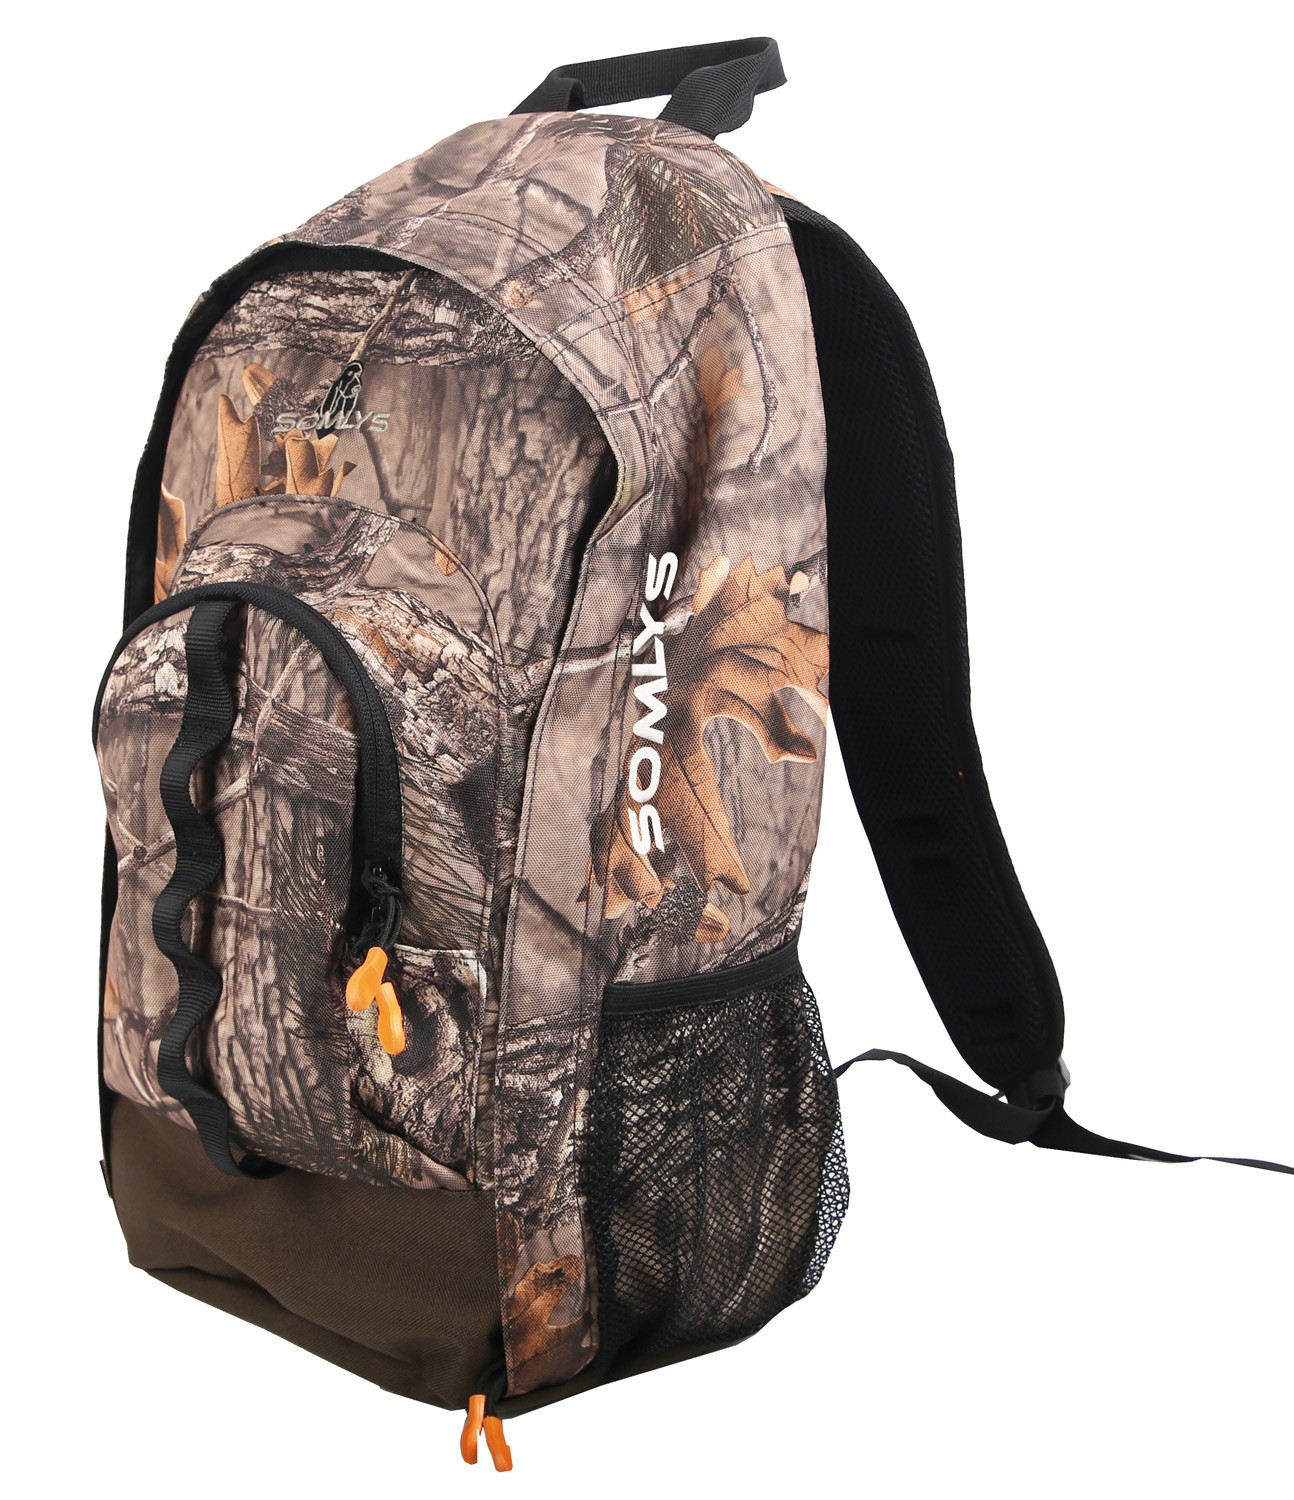 Sac à dos de Somlys 1016 - 25 L, MADE IN CHASSE - Equipements de chasse